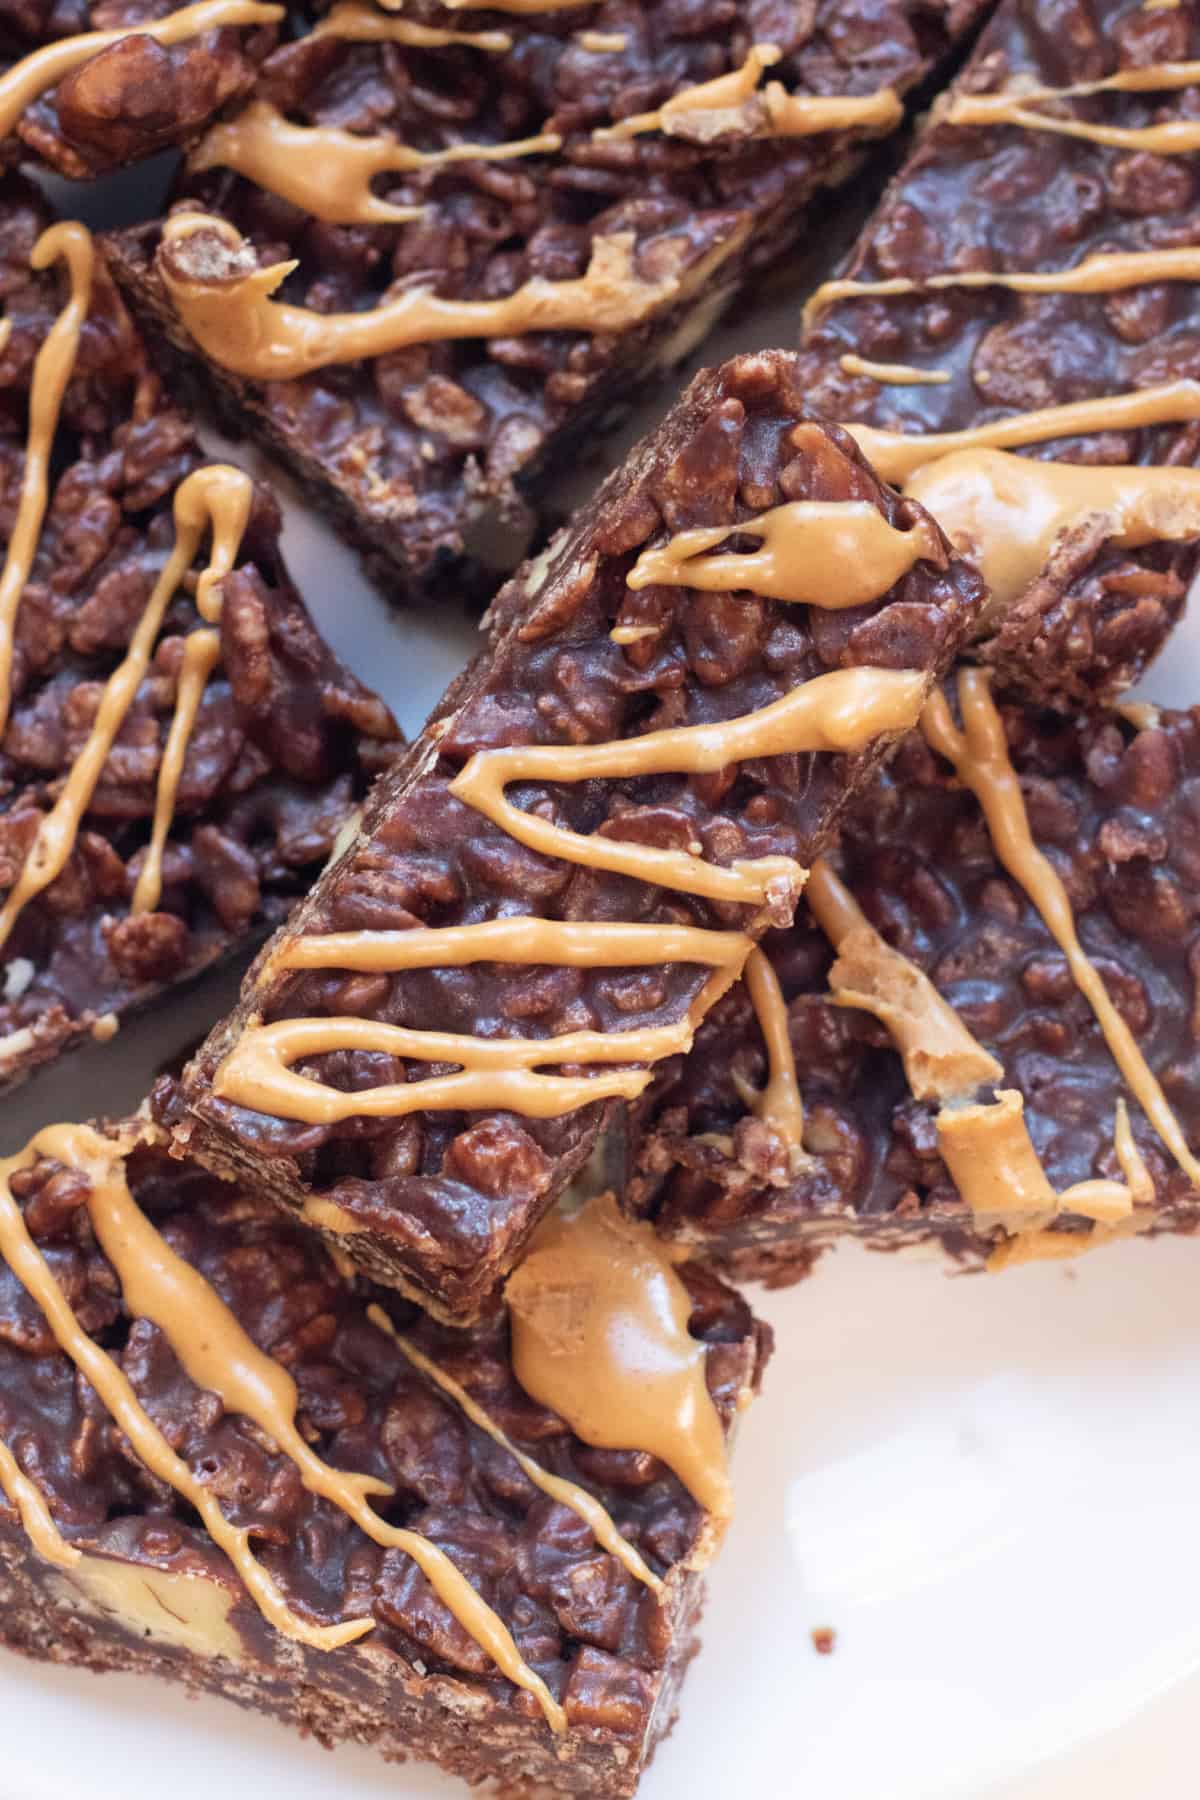 a plate of chocolate crunch bars with peanut butter swirls.